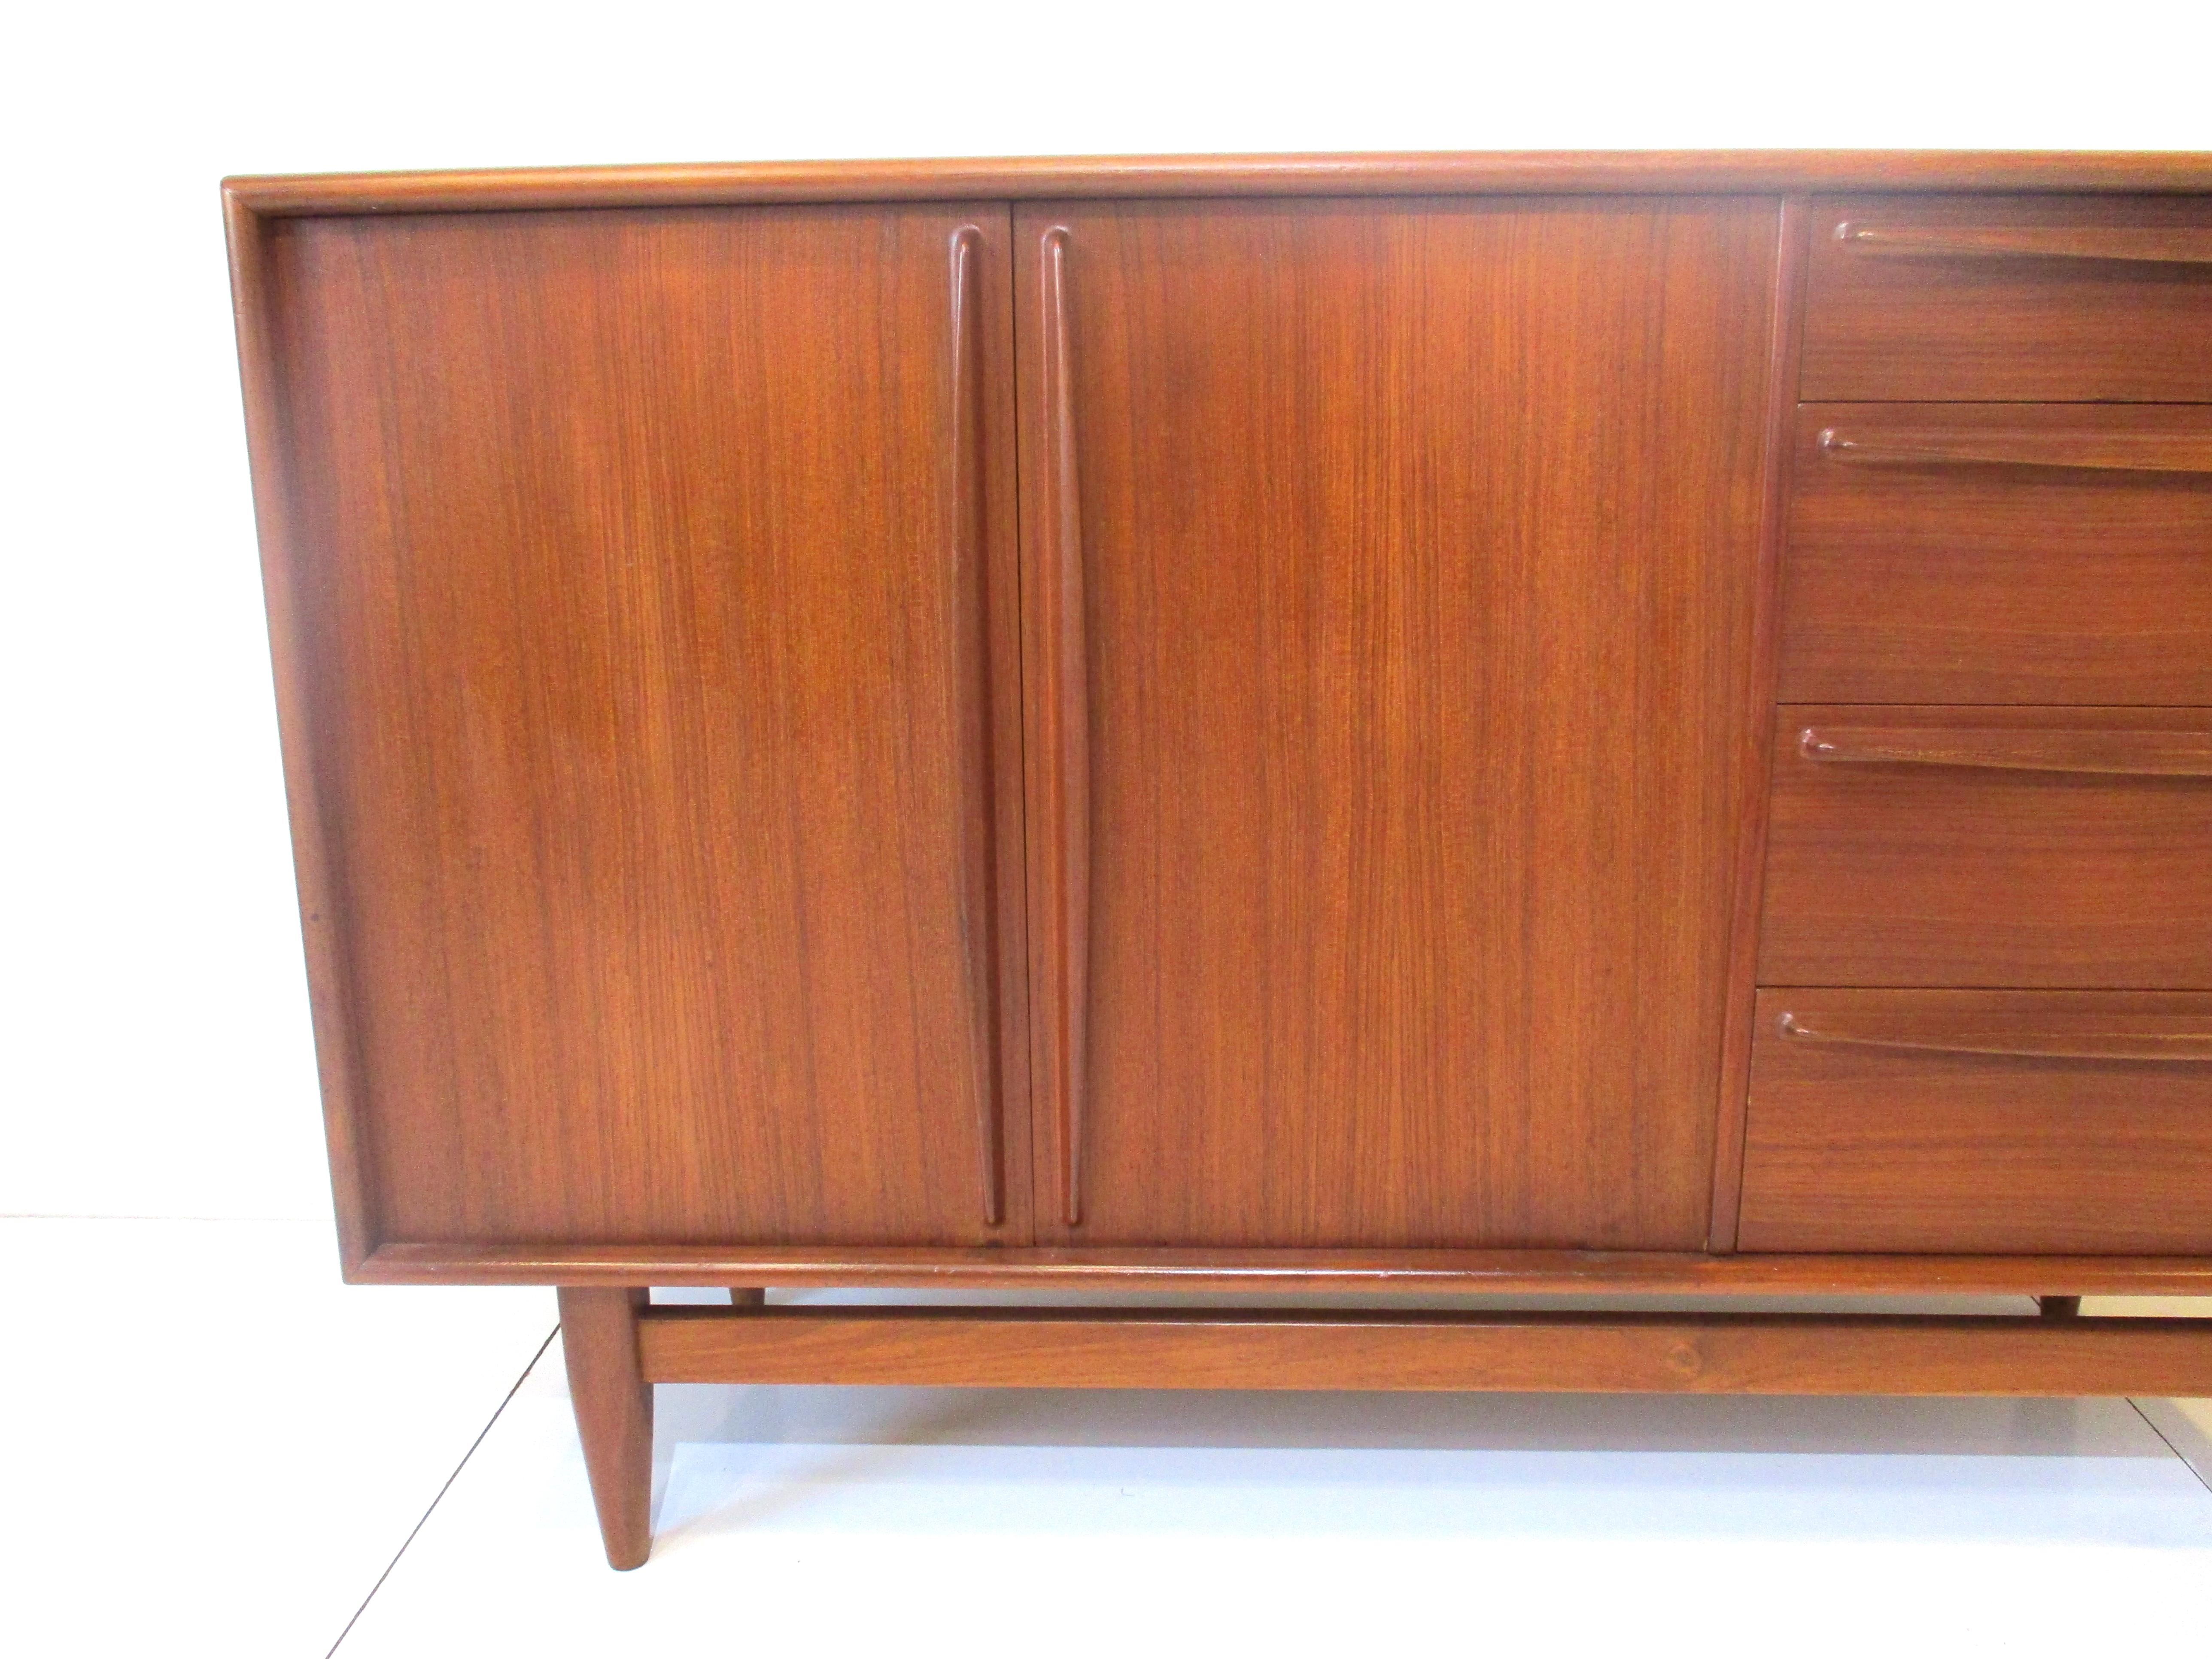 A very well crafted teak wood credenza with four drawers and two doors with long sleek matching handles and pulls . Having plenty of storage and two adjustable shelves inside the cabinet , all sitting on conical styled legs and cross stretchers